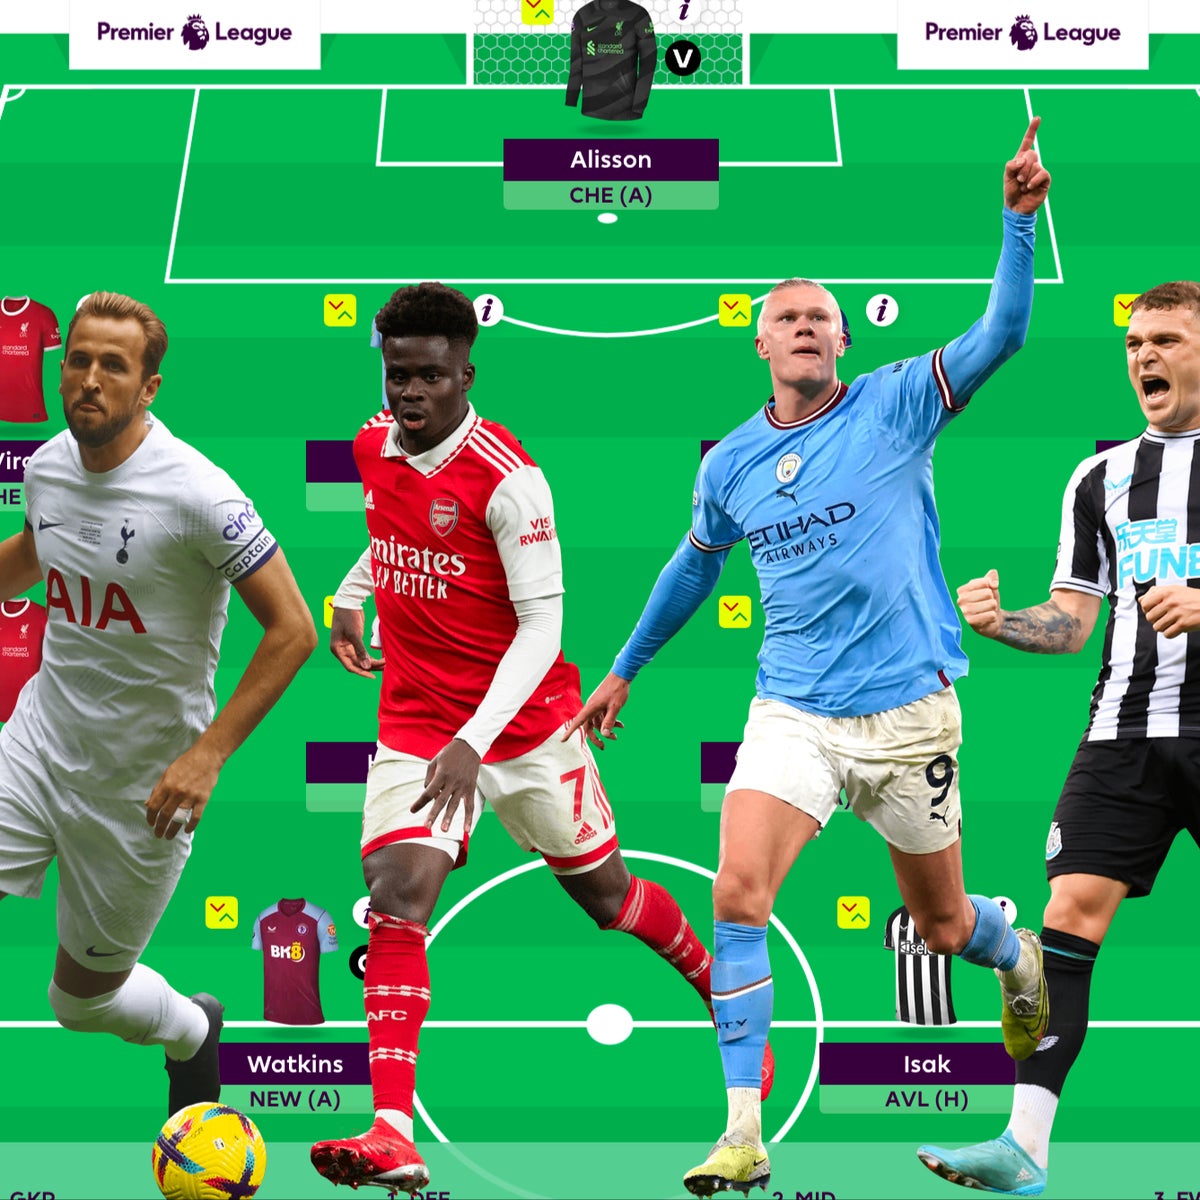 Fantasy Premier League – FPL Picks, Best Players and More for Gameweek 20